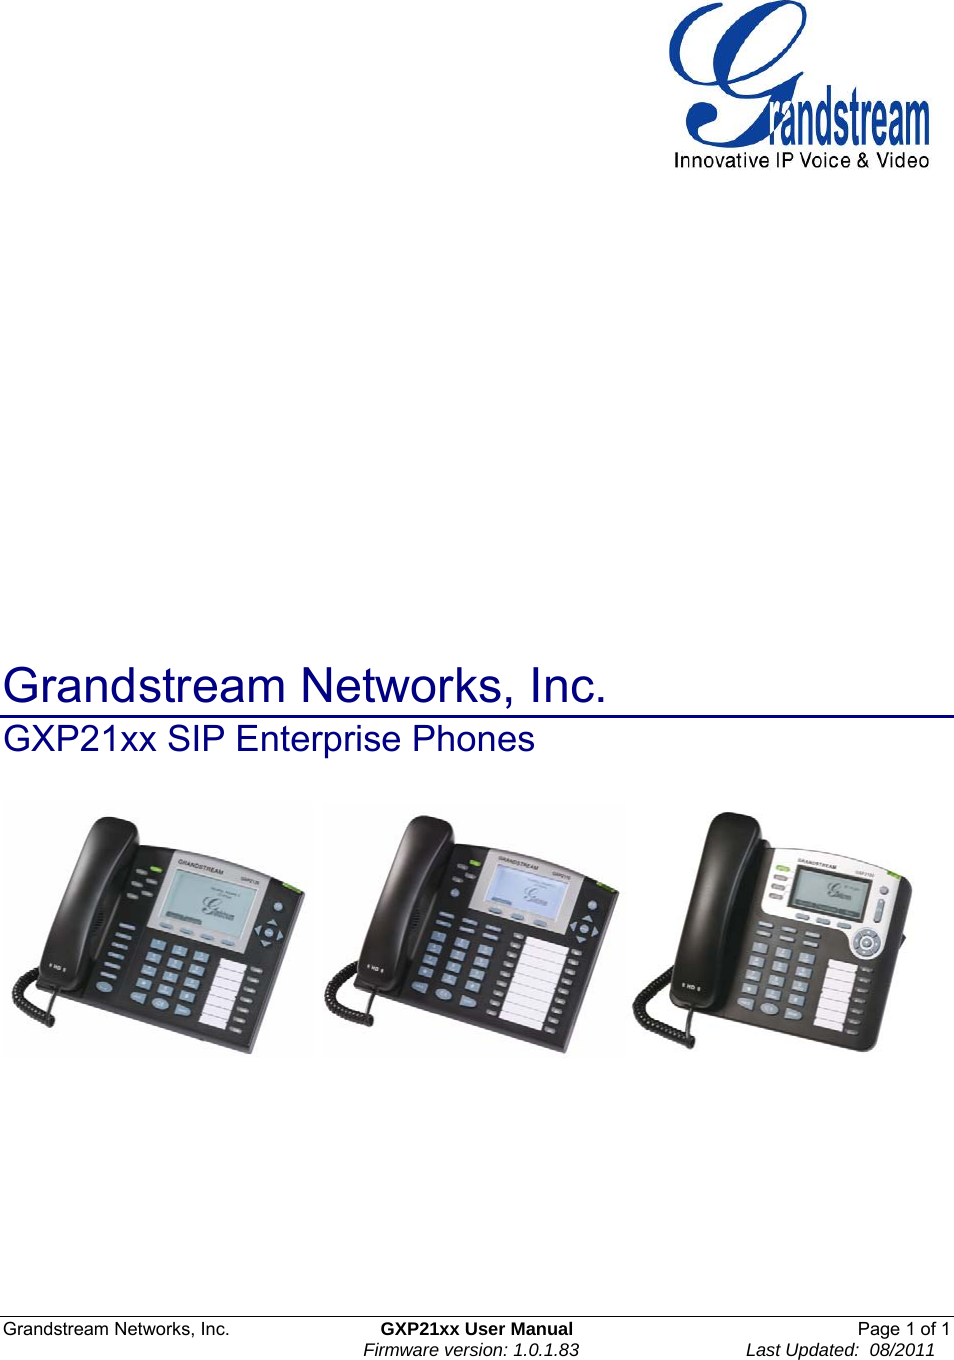 Grandstream Networks, Inc.  GXP21xx User Manual  Page 1 of 1                                                                      Firmware version: 1.0.1.83                                 Last Updated:  08/2011                      Grandstream Networks, Inc.   GXP21xx SIP Enterprise Phones                   